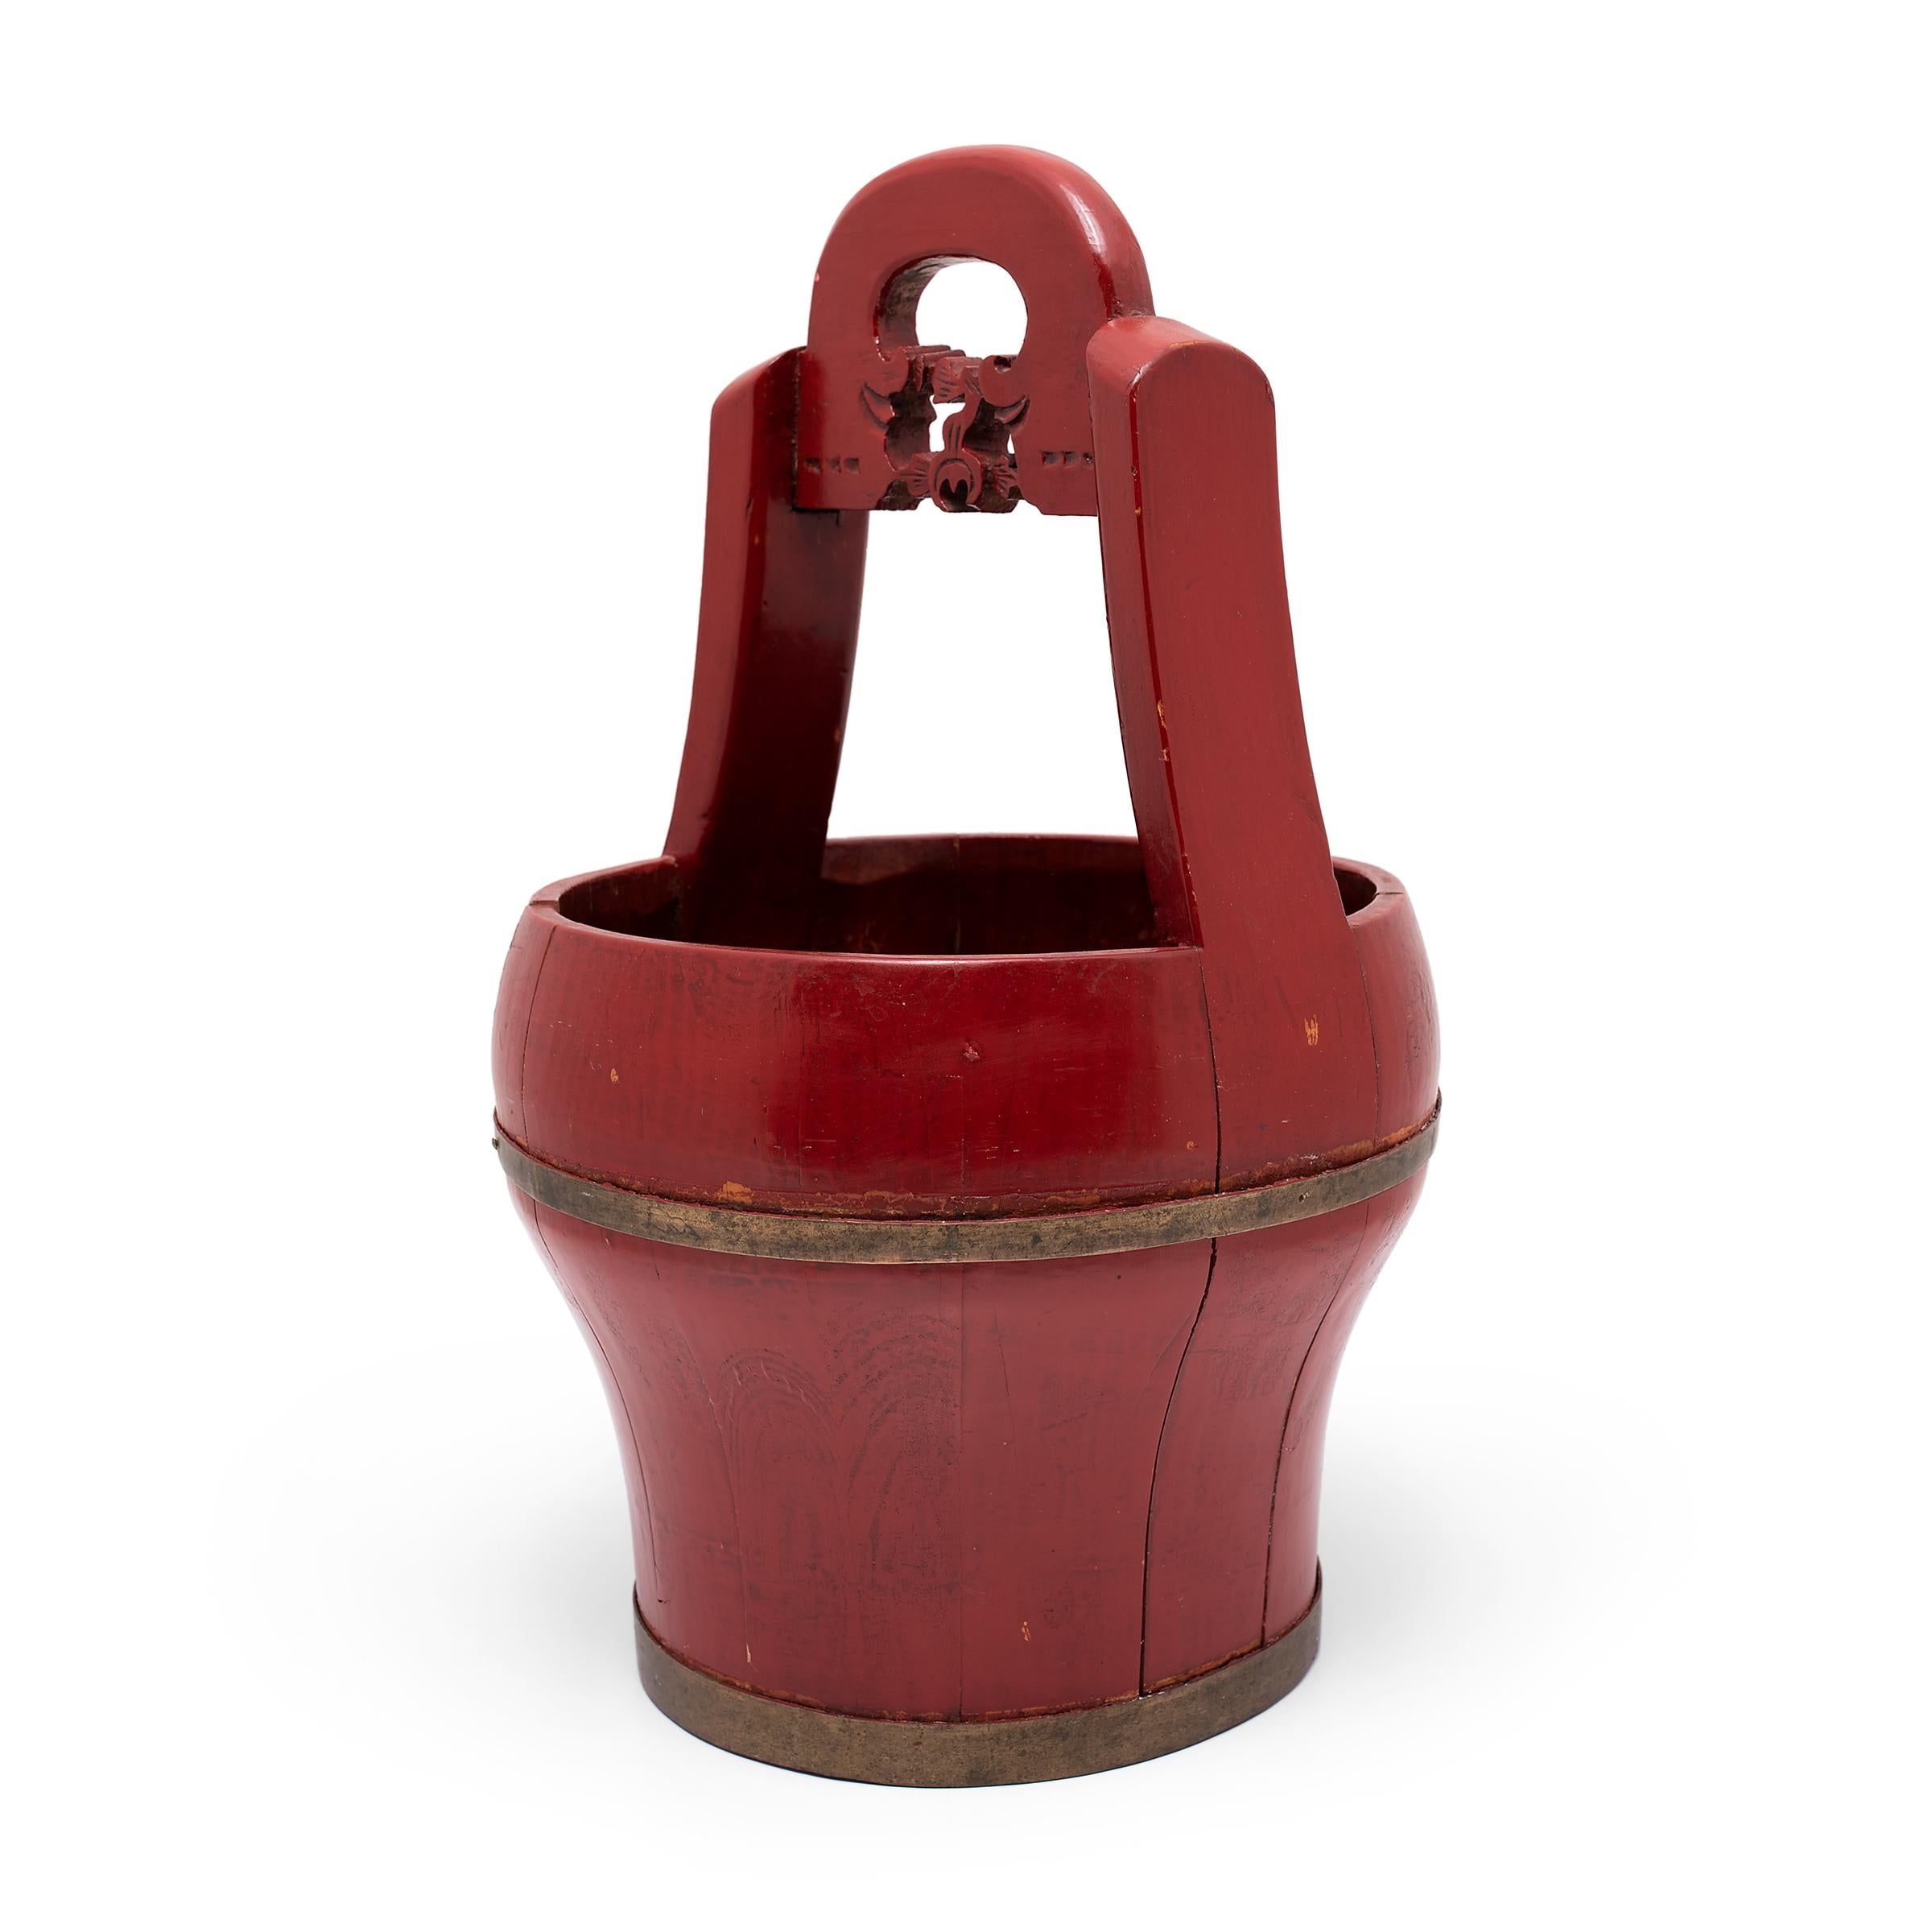 This red lacquer bucket dates to the late 19th century and was originally used as a portable container for carrying food, water, and other goods for long distances. The tall carved handle allowed the container to be placed on a carrying pole